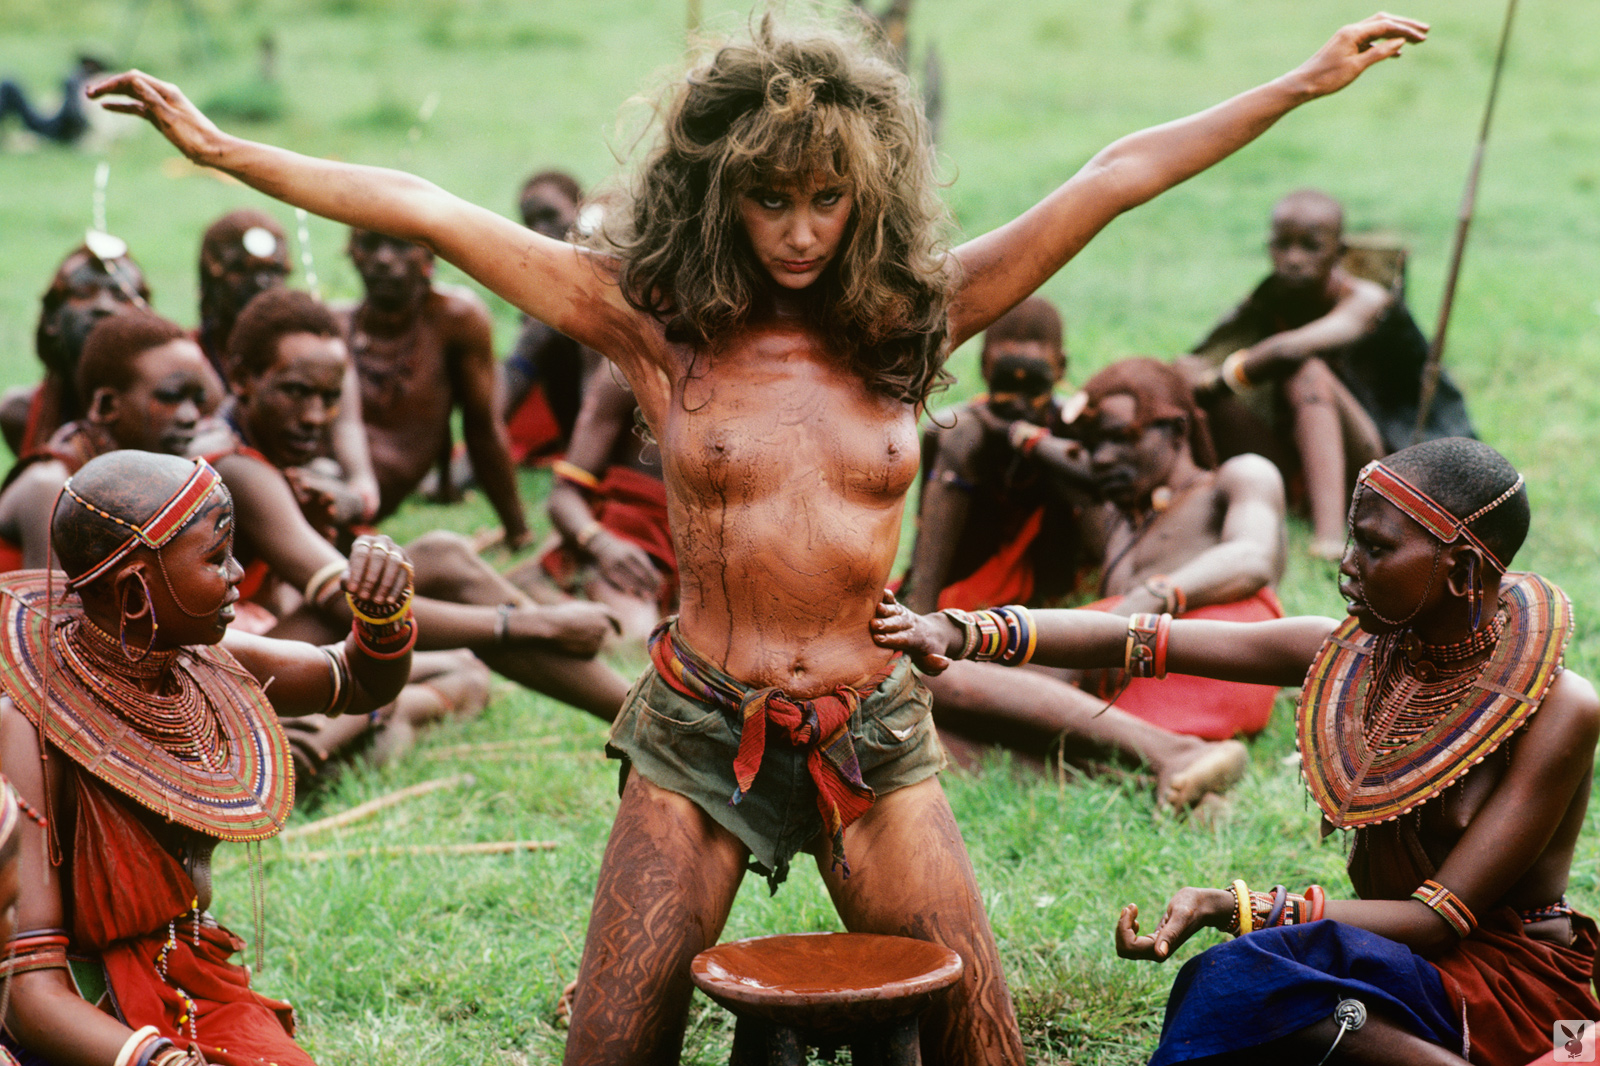 Rituals and traditional tribal tribes apcis nude in africa